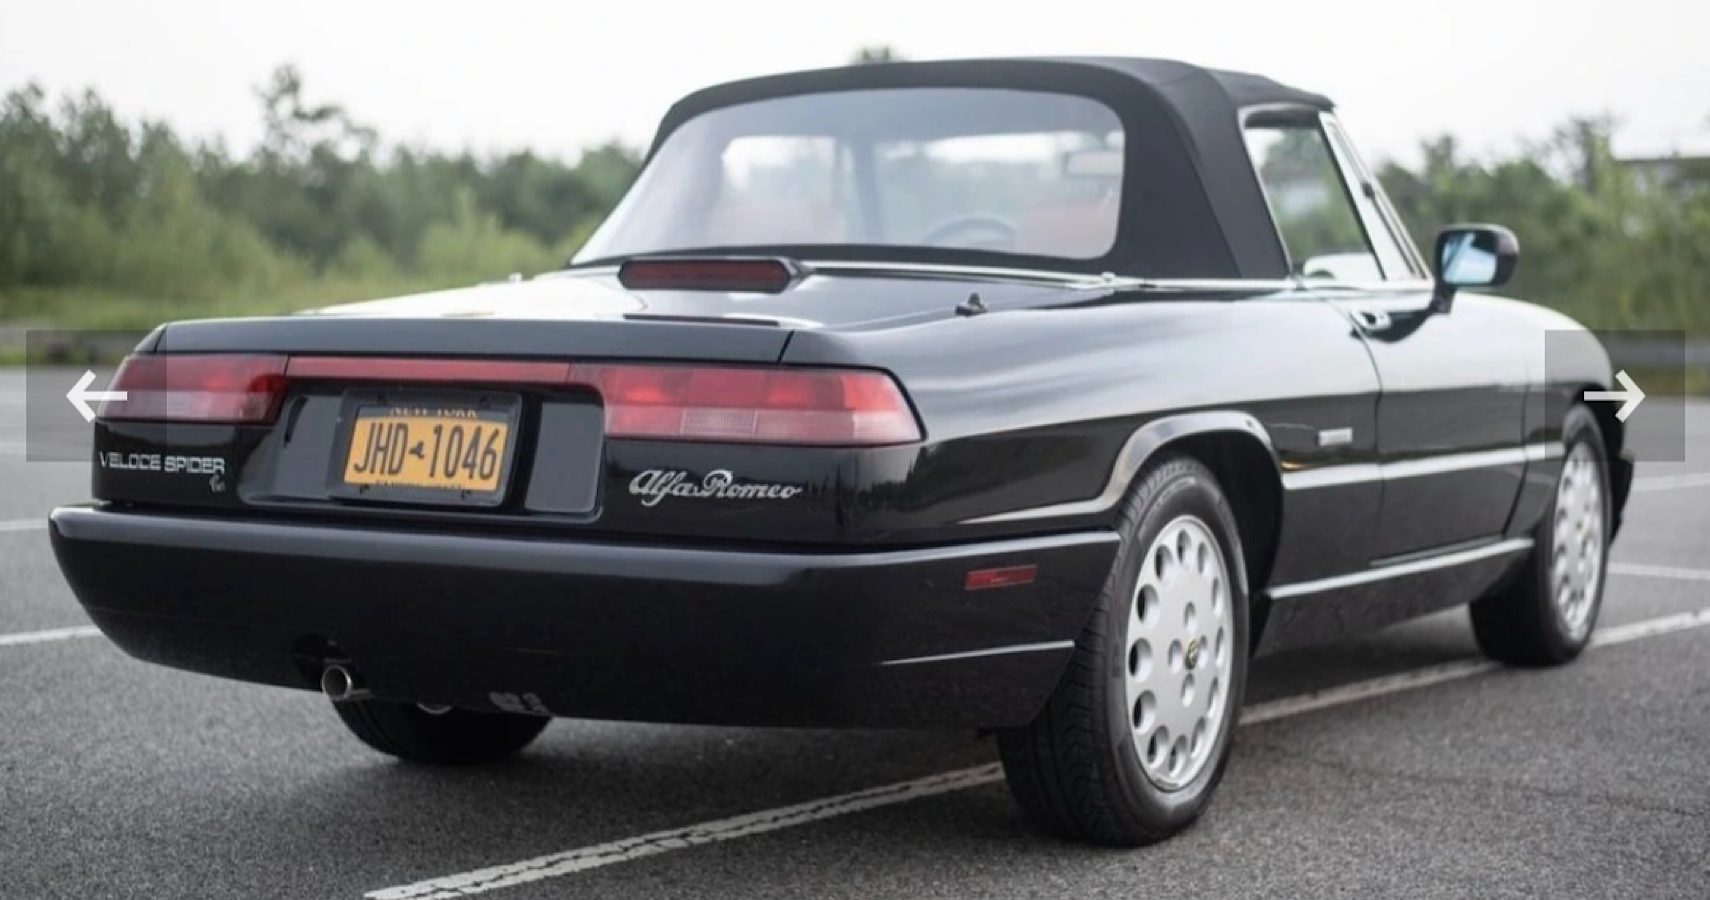 The Alfa Romeo Spider Veloce CE Is The Last Rare And Affordable Italian Sports Car